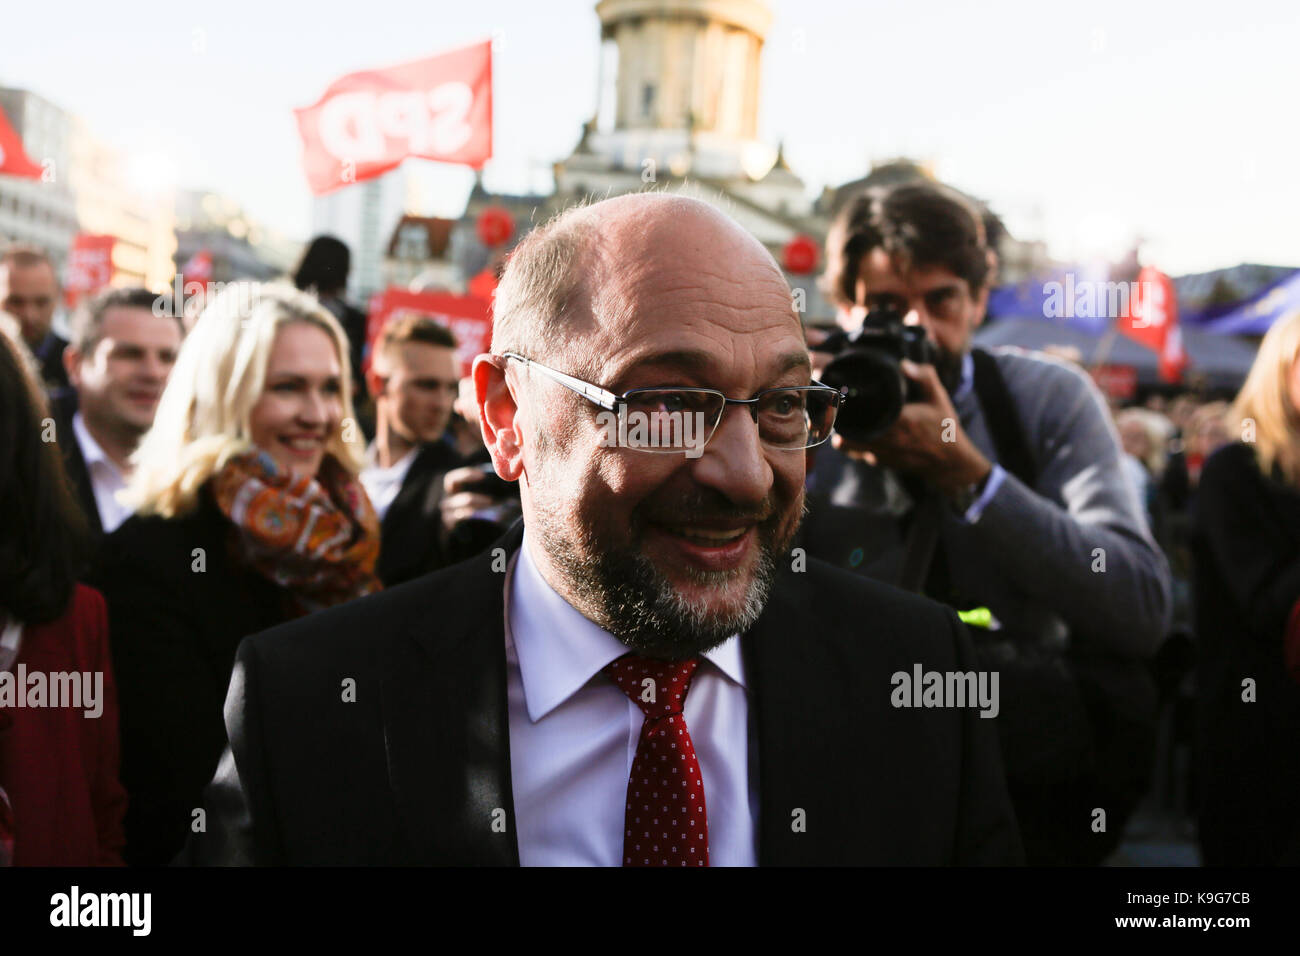 Berlin, Germany. 22nd Sep, 2017. Martin Schulz drives at the rally. The candidate for the German Chancellorship of the SPD (Social Democratic Party of Germany) was the main speaker at a large rally in the centre of Berlin, two days ahead of the German General Election. Credit: Michael Debets/Pacific Press/Alamy Live News Stock Photo